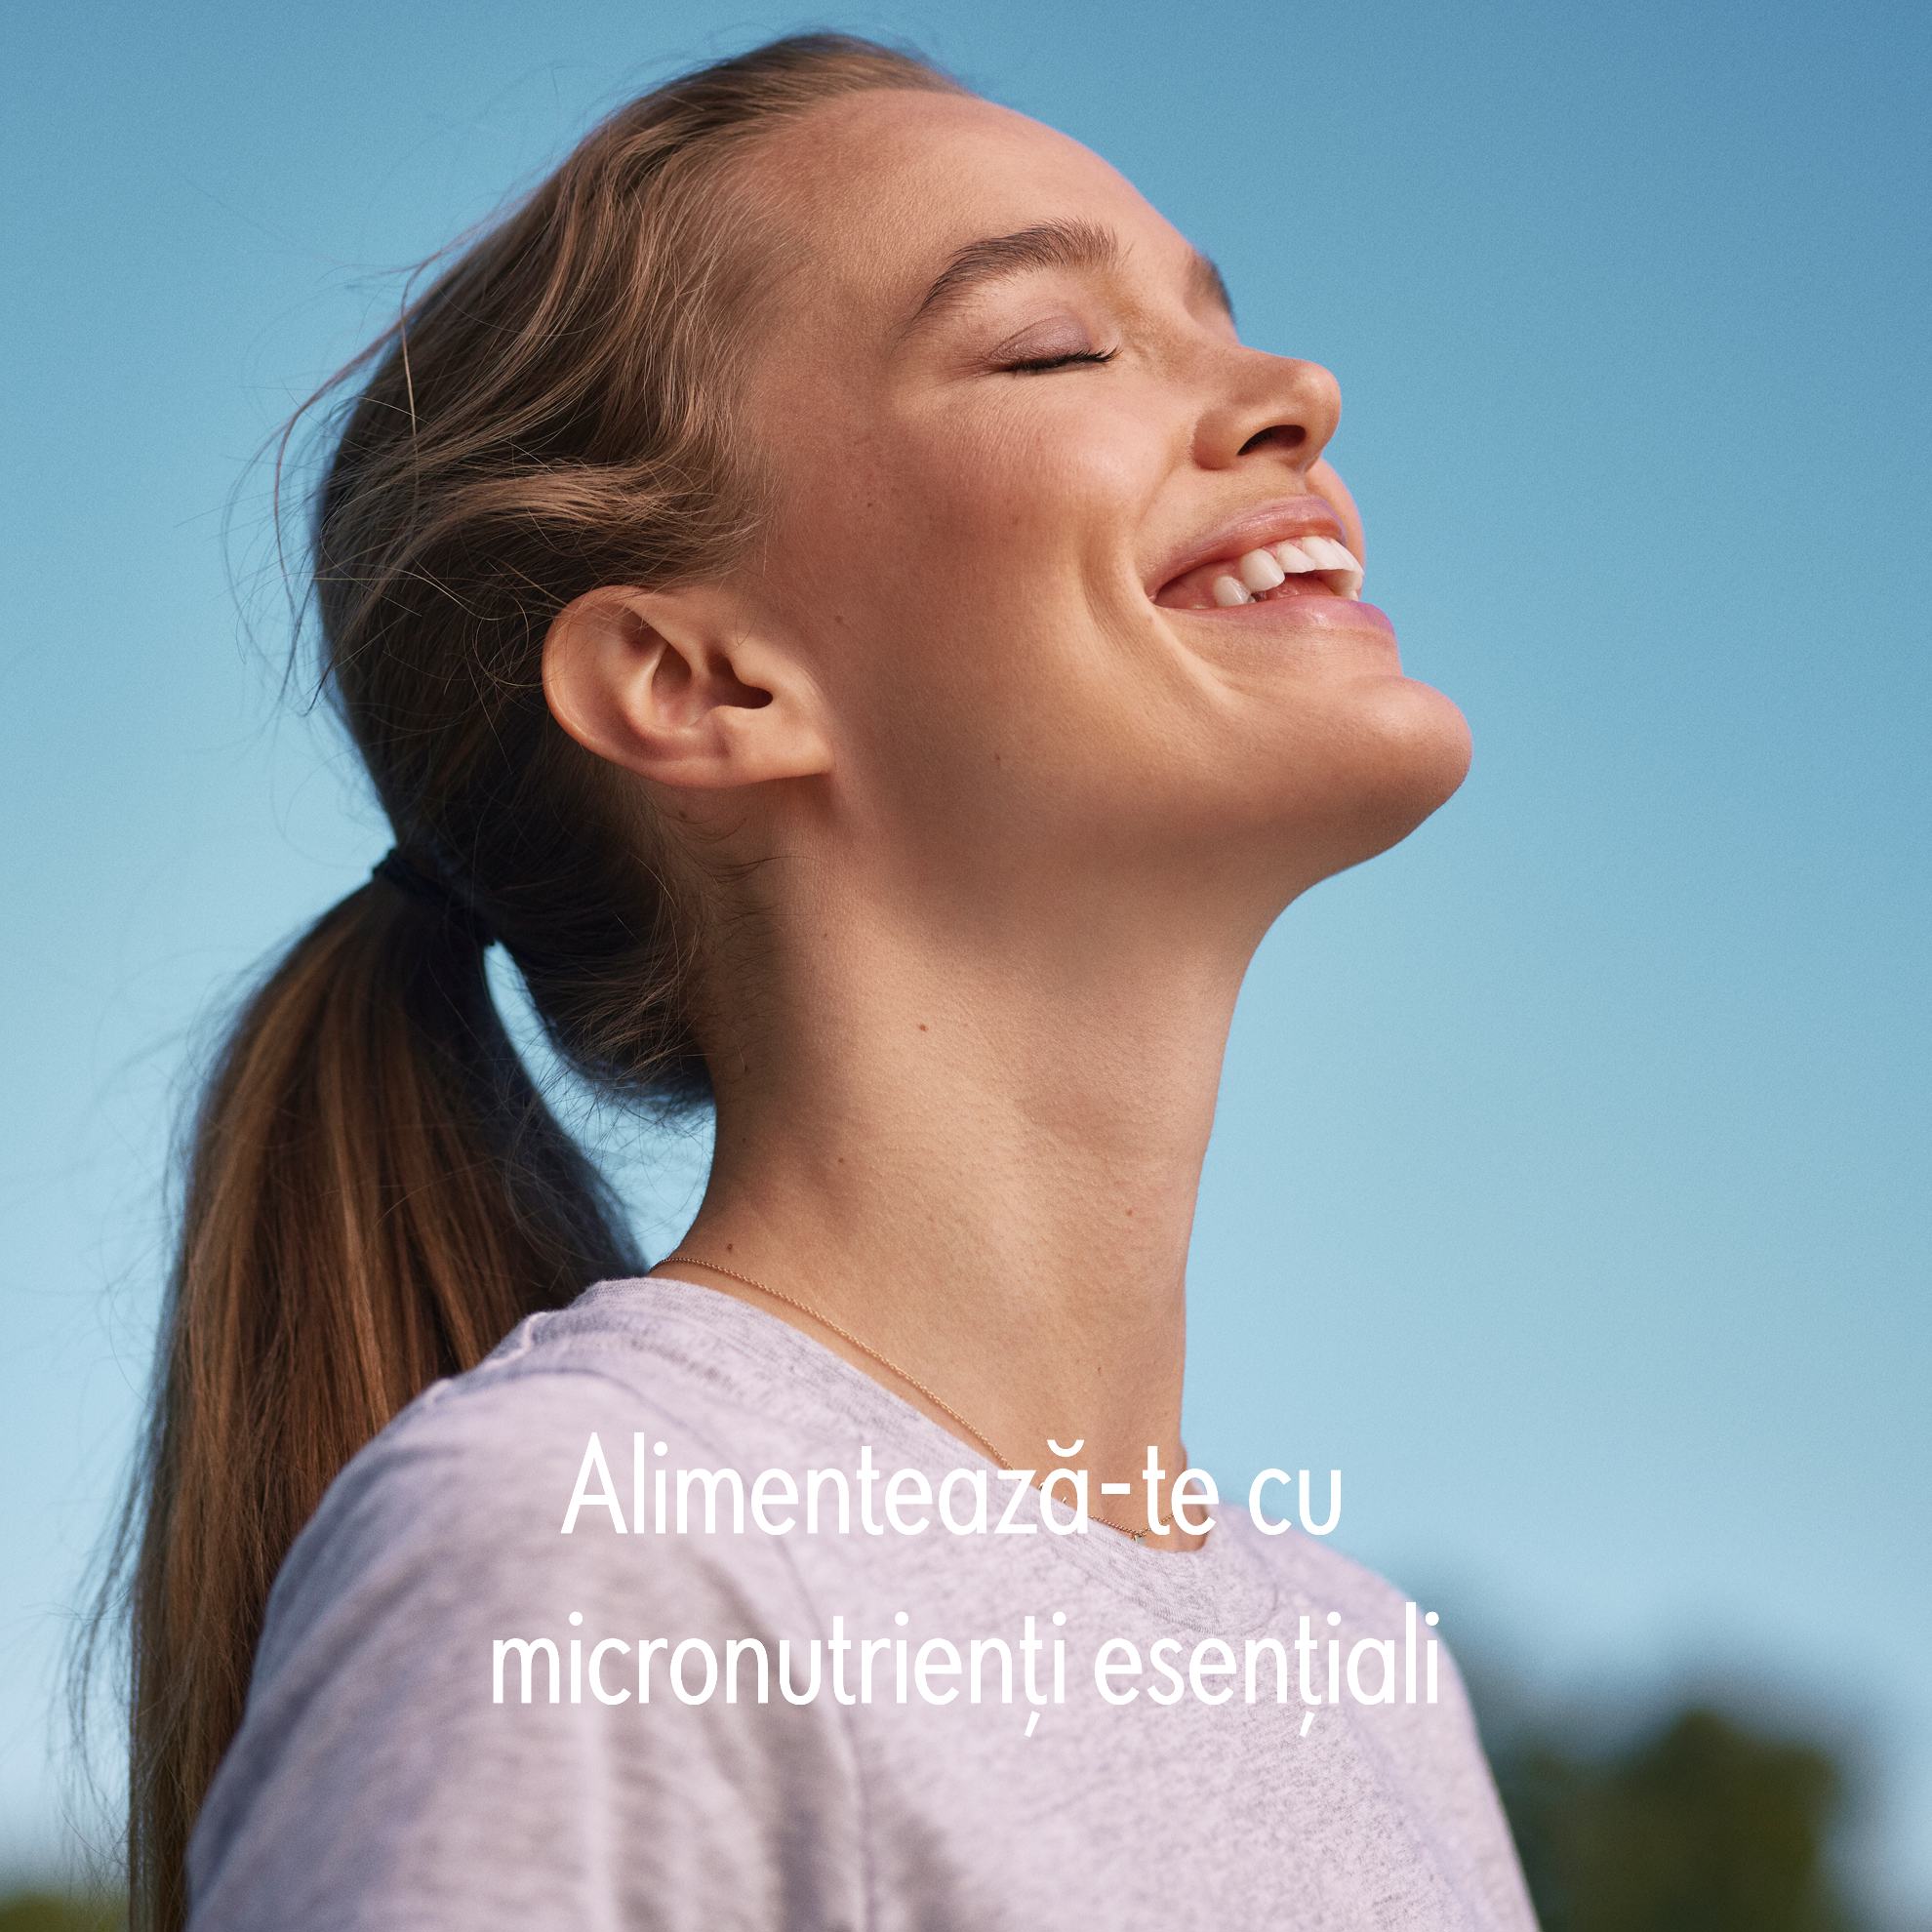 https://media-cdn.oriflame.com/productImage?externalMediaId=product-management-media%2fProducts%2f38559%2fRO%2f38559_5.png&id=18356129&version=1